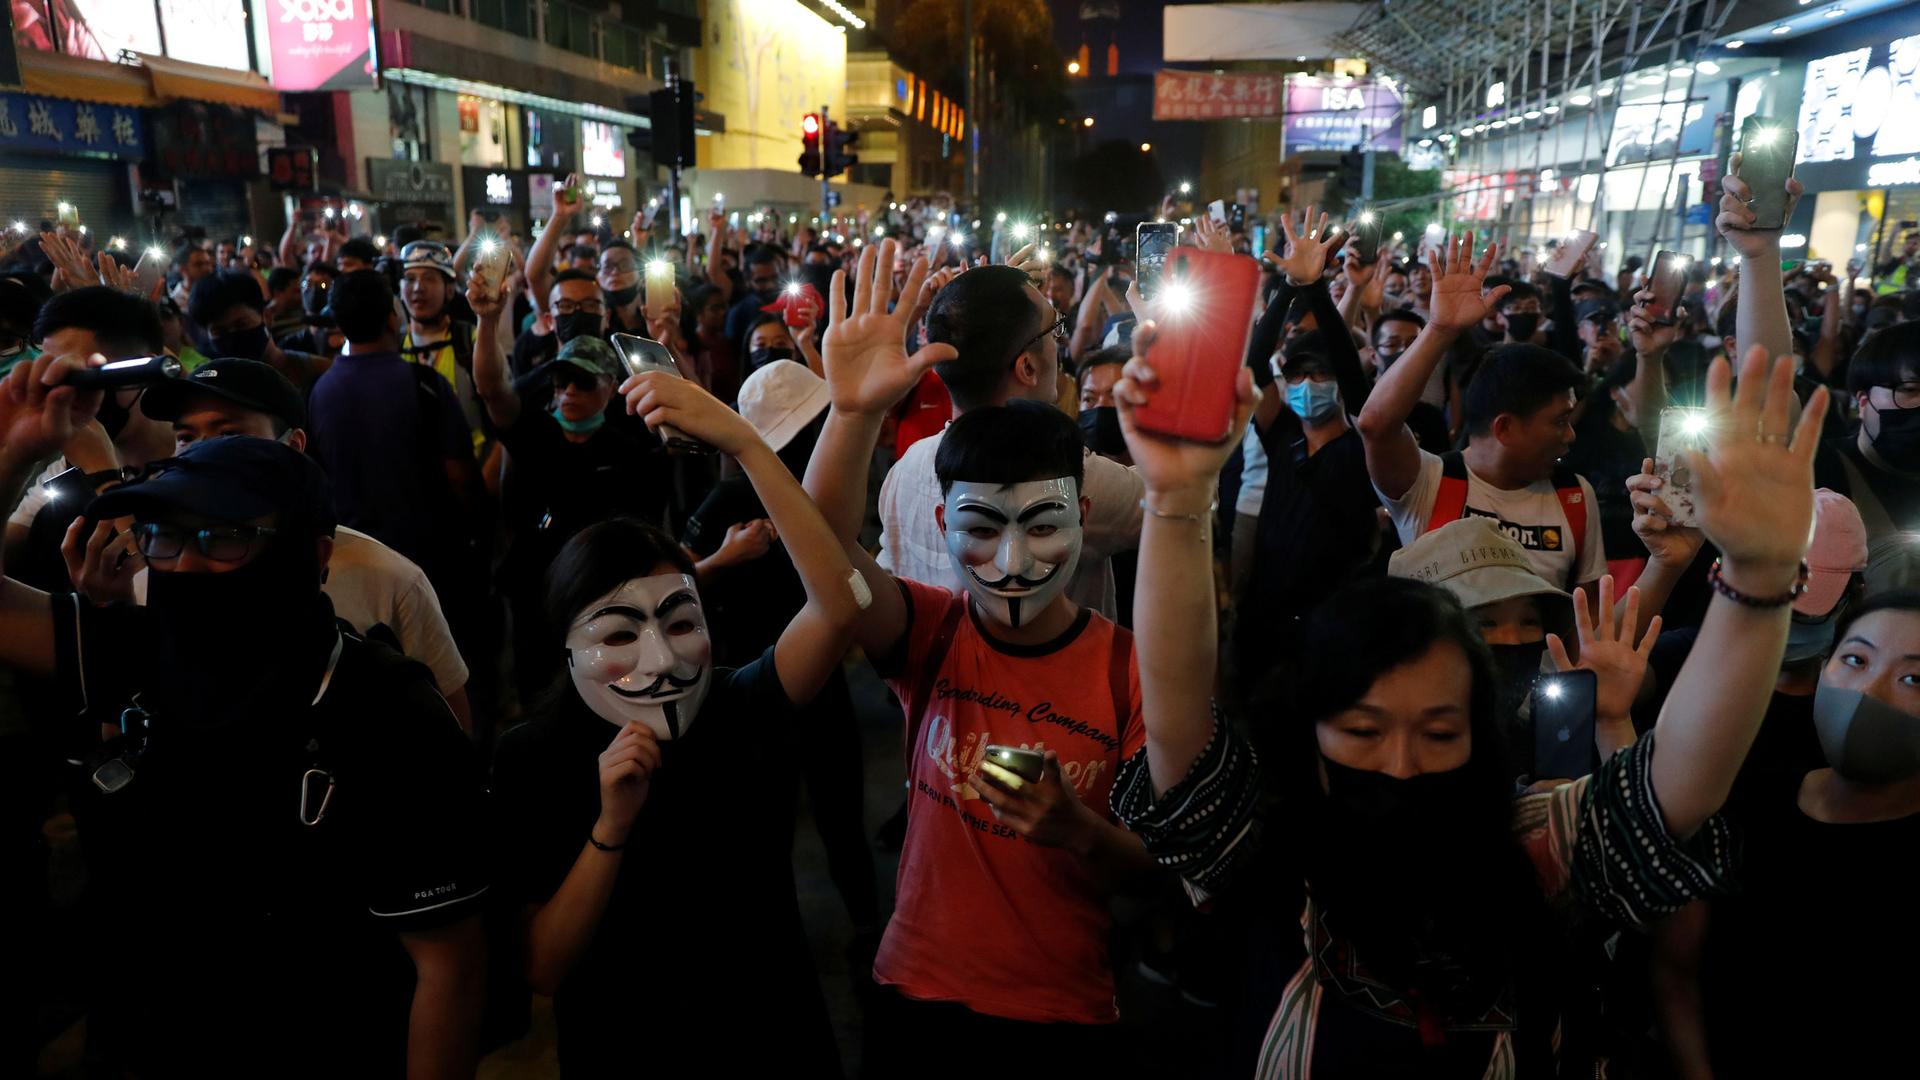 Demonstrators wearing masks hold their cell phones, with the flashlights on, over their heads as they are crowded together in a street